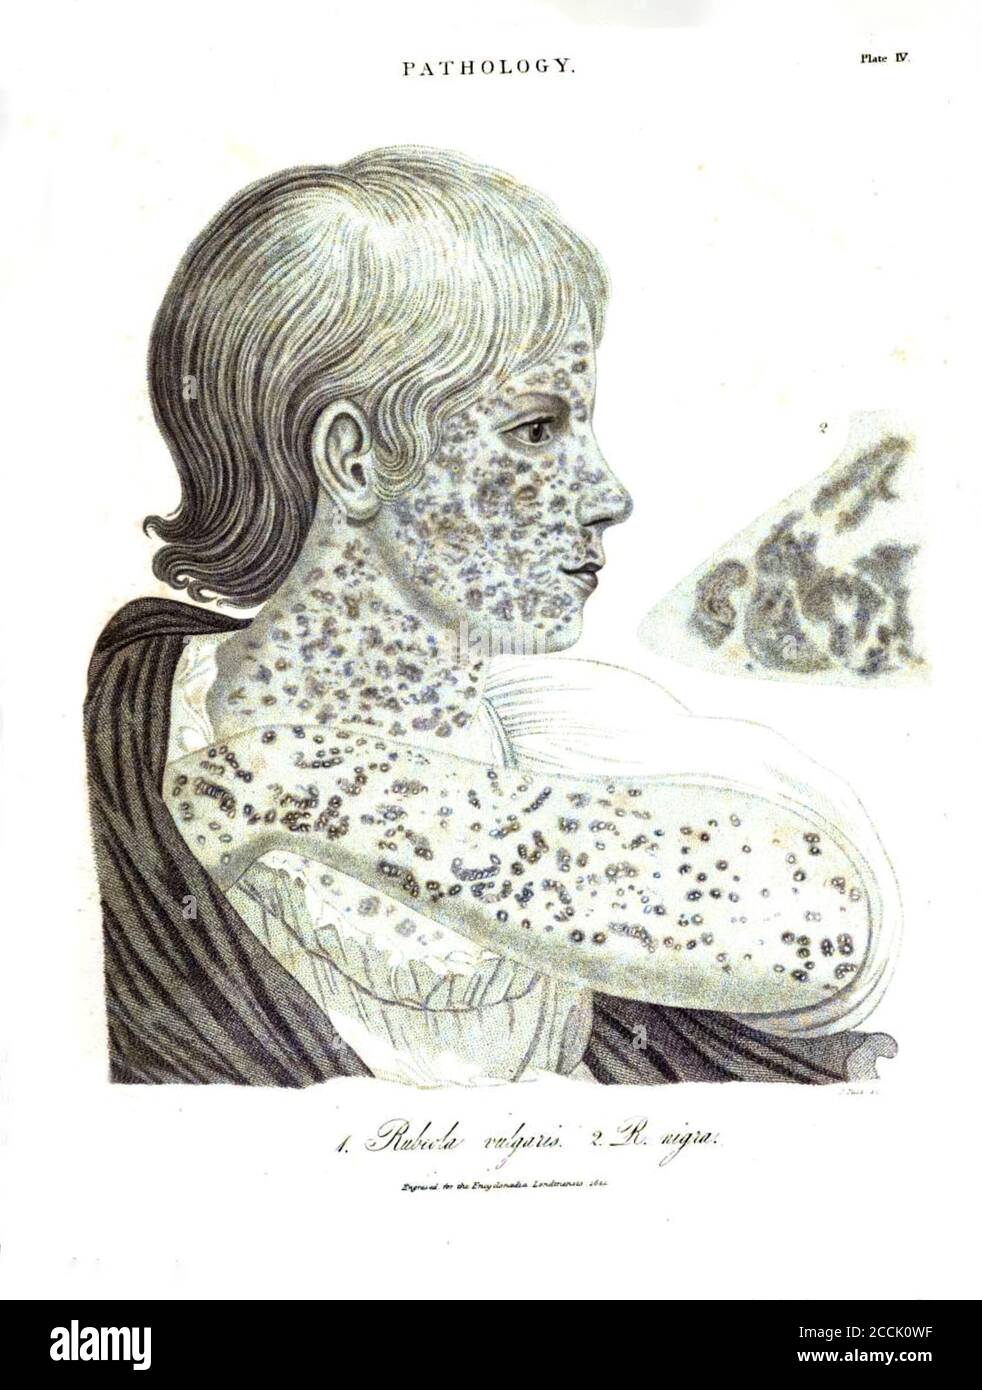 Illustration of a pathological skin disease caused by Rubeola measles From the Encyclopaedia Londinensis or, Universal dictionary of arts, sciences, and literature; Volume XIX;  Edited by Wilkes, John. Published in London in 1823 Stock Photo